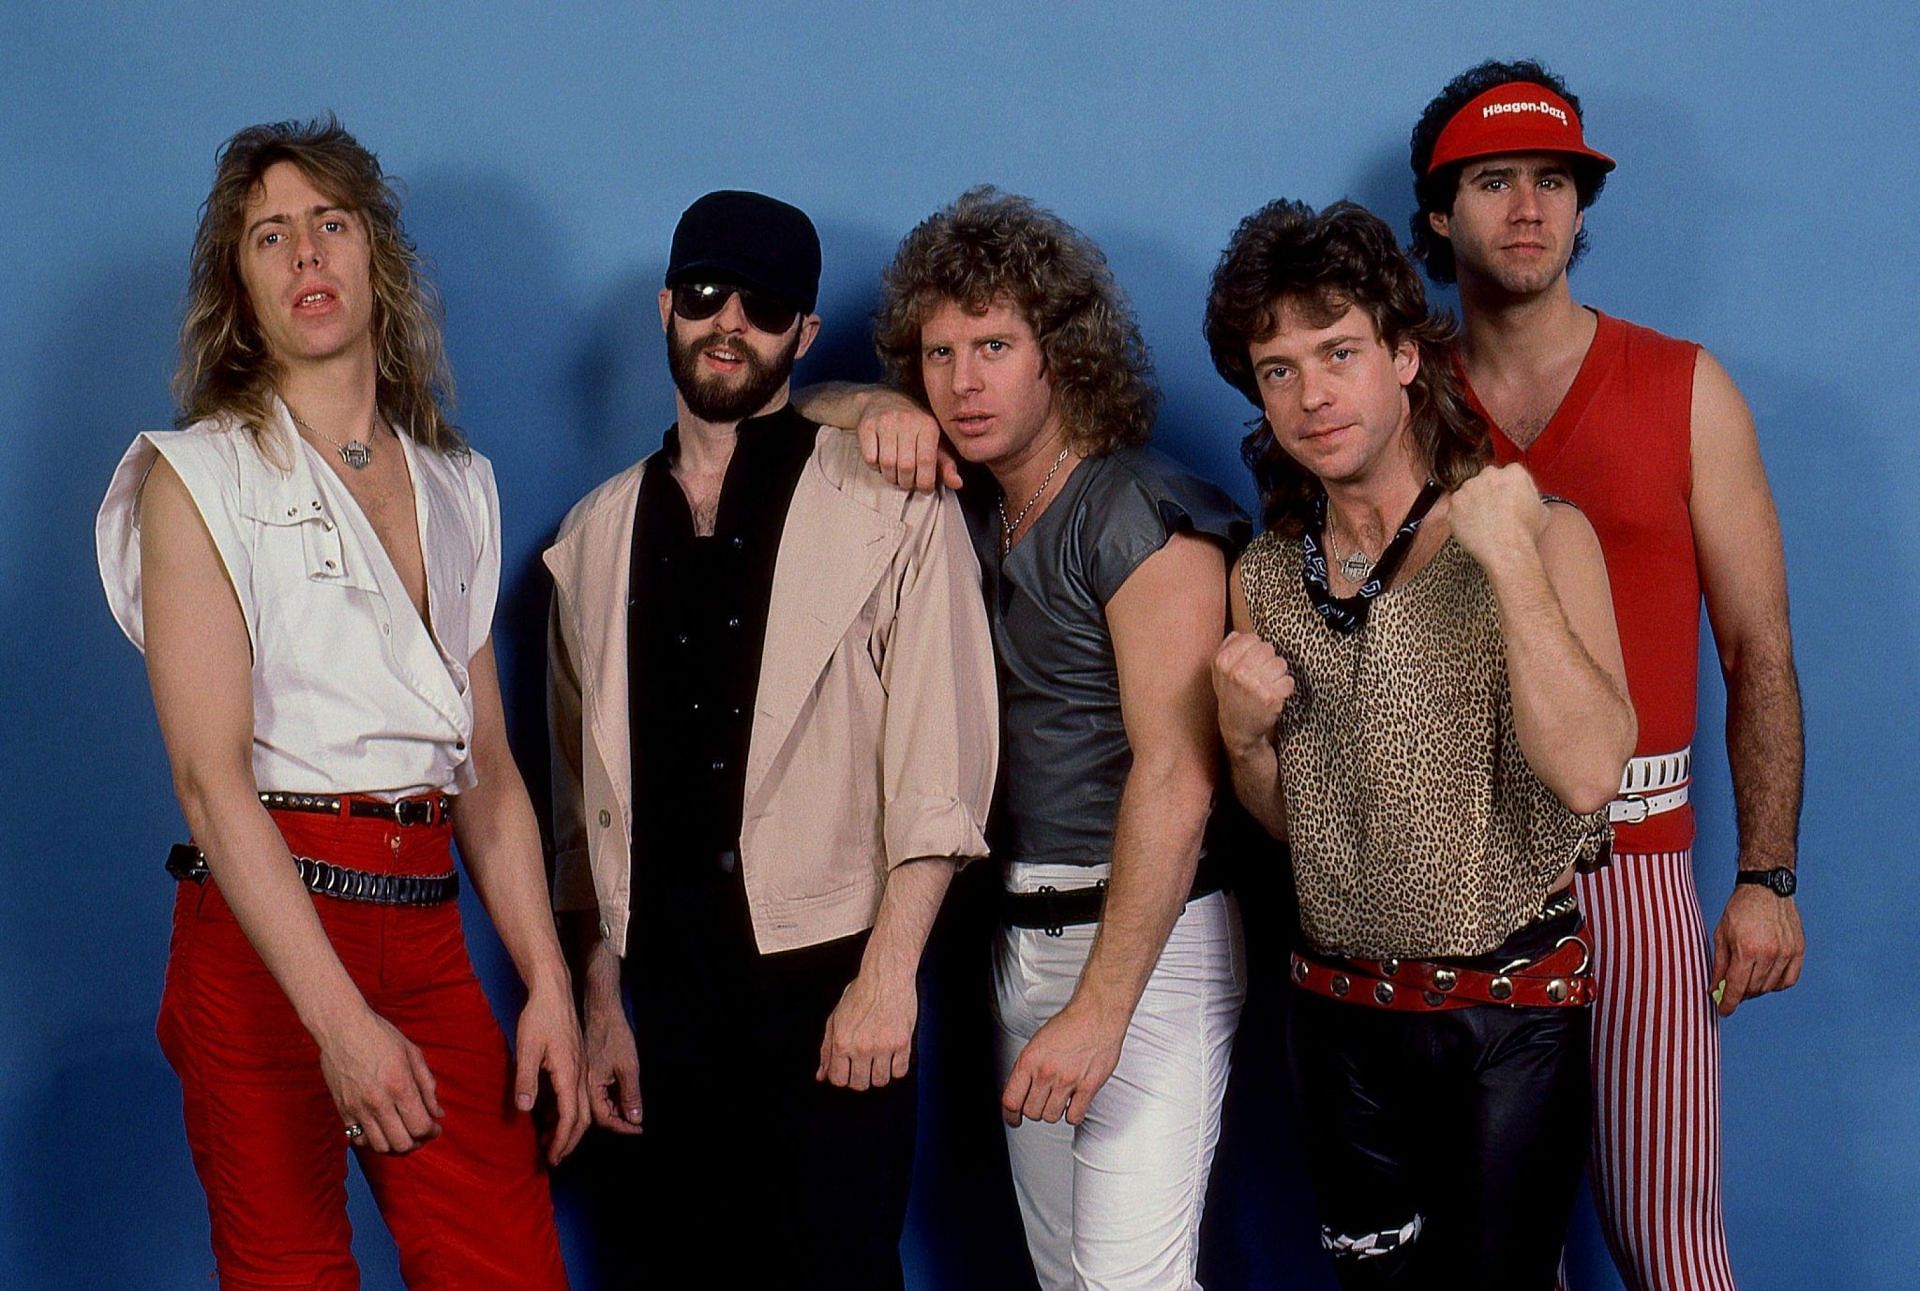 “We want to apologize” Night Ranger members issue statement as